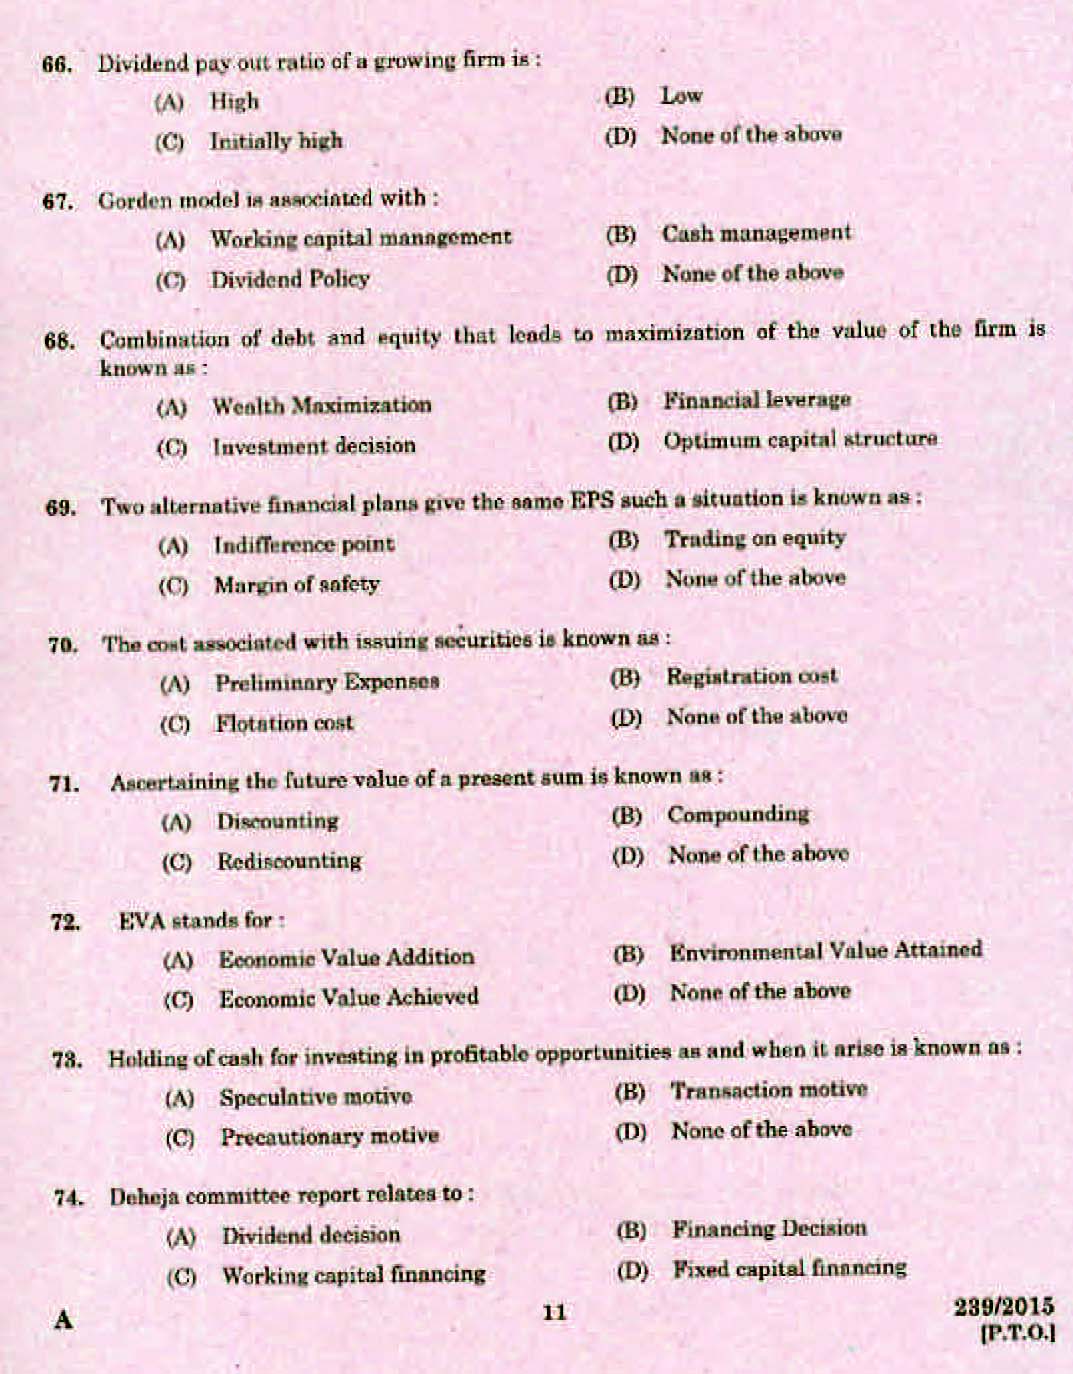 Kerala PSC Accounts Officer OMR Exam 2015 Question Paper Code 2392015 9